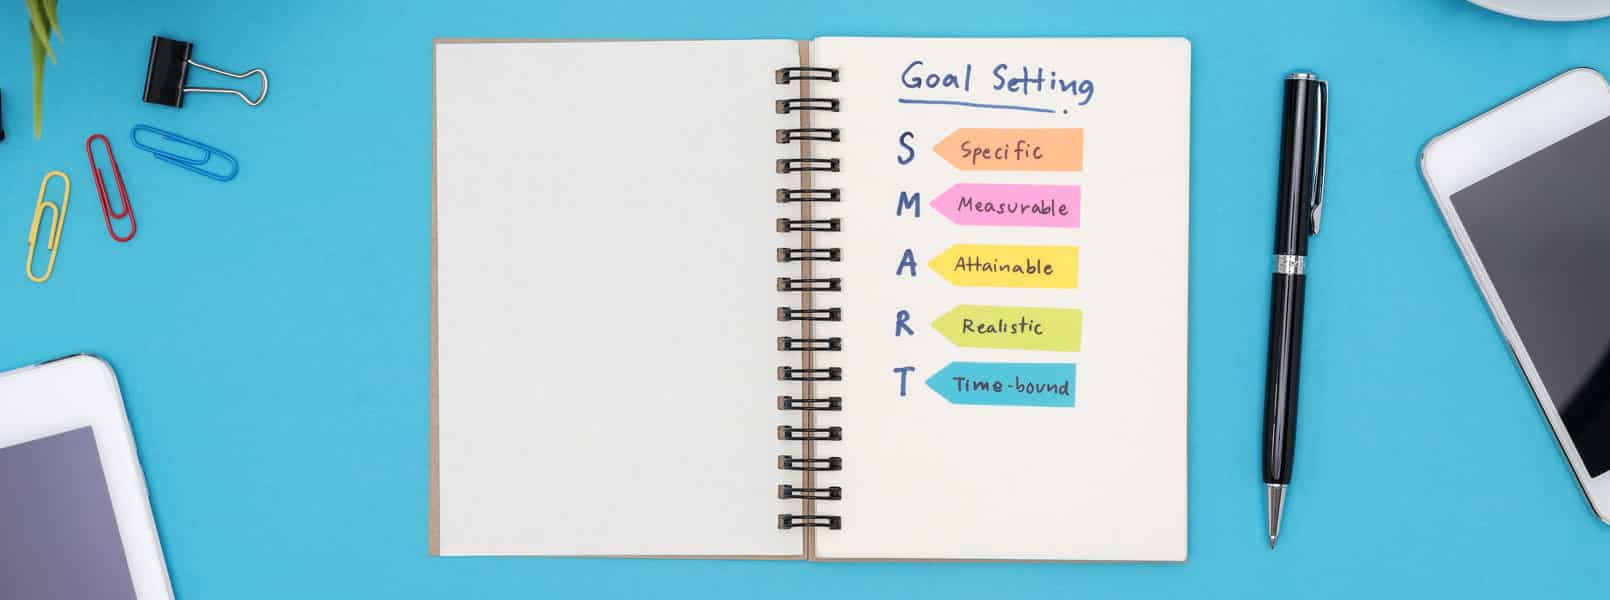 Goal-setting planner with an outline of the SMART goal strategy